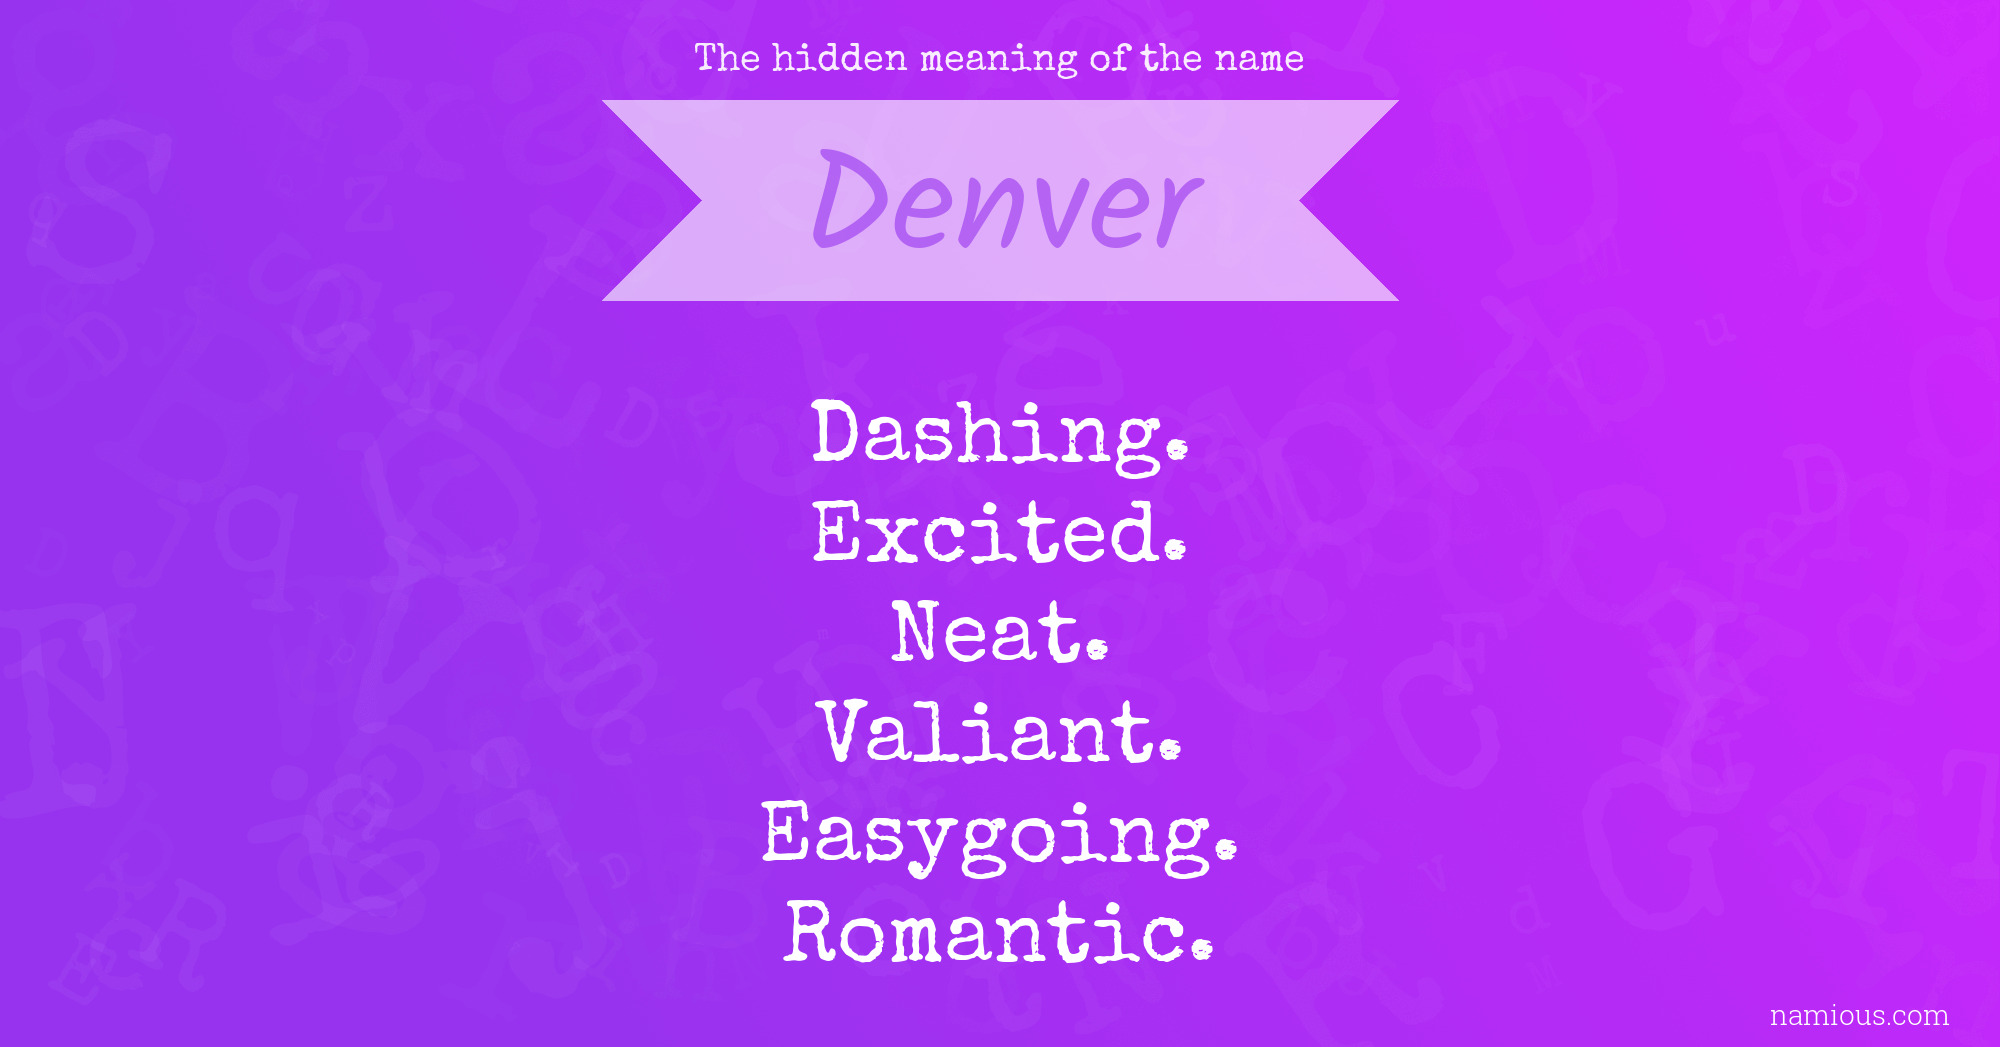 The hidden meaning of the name Denver